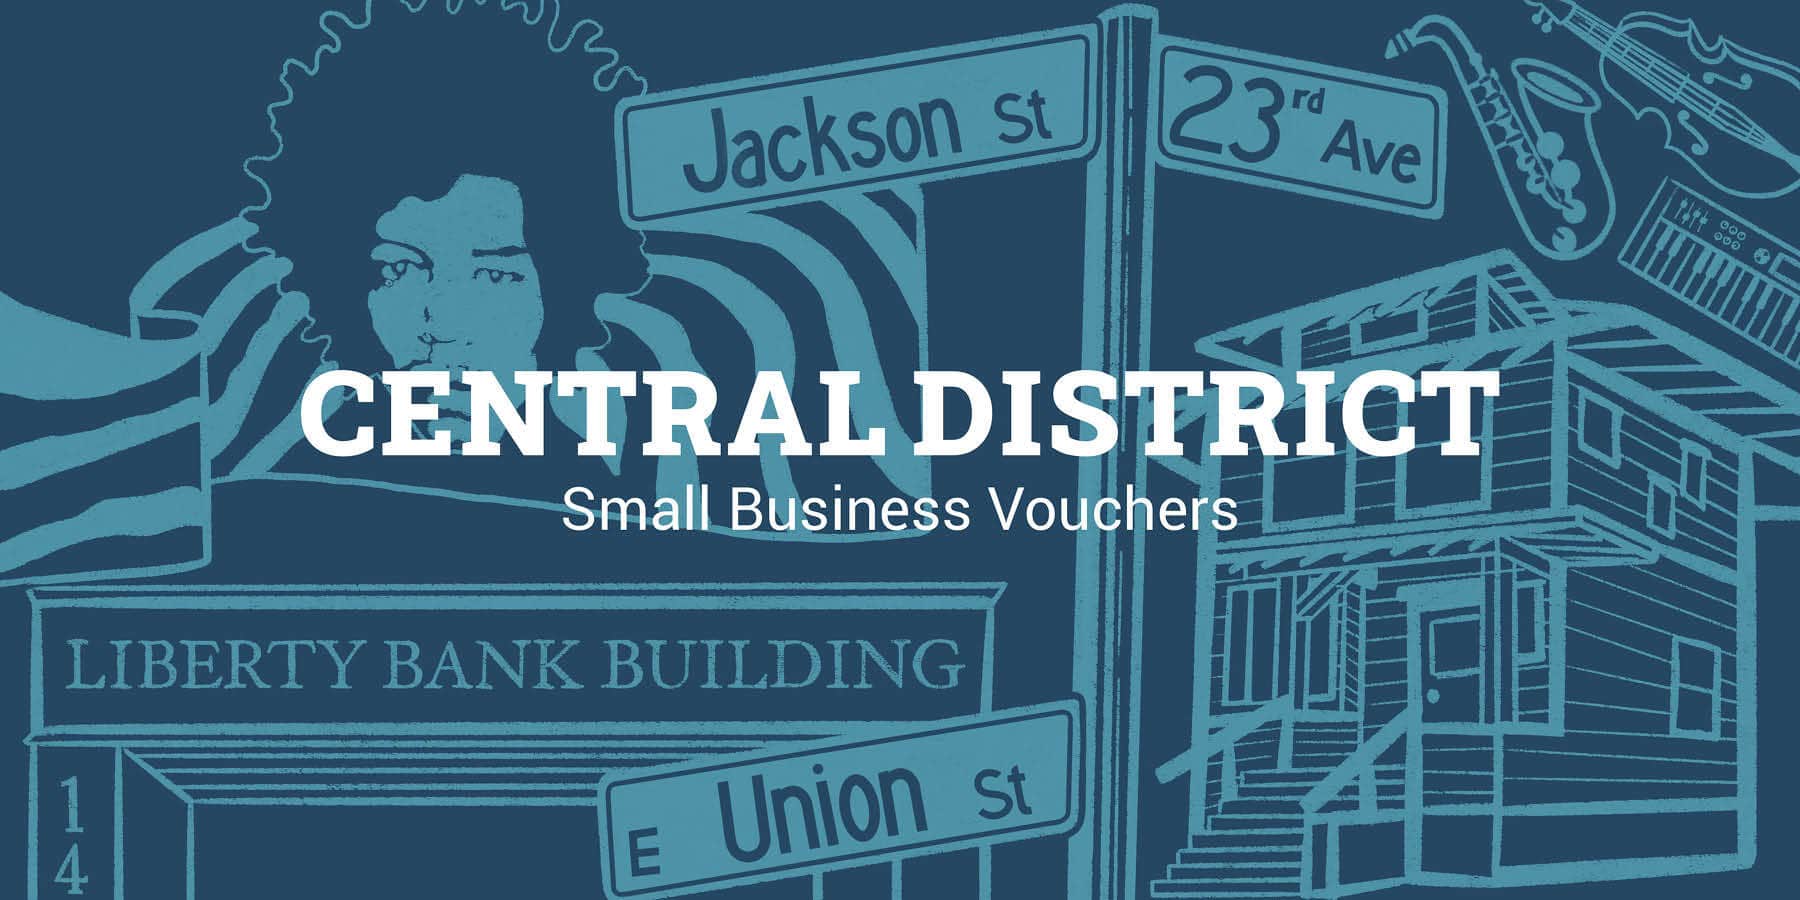 Seattle Central District Small Business